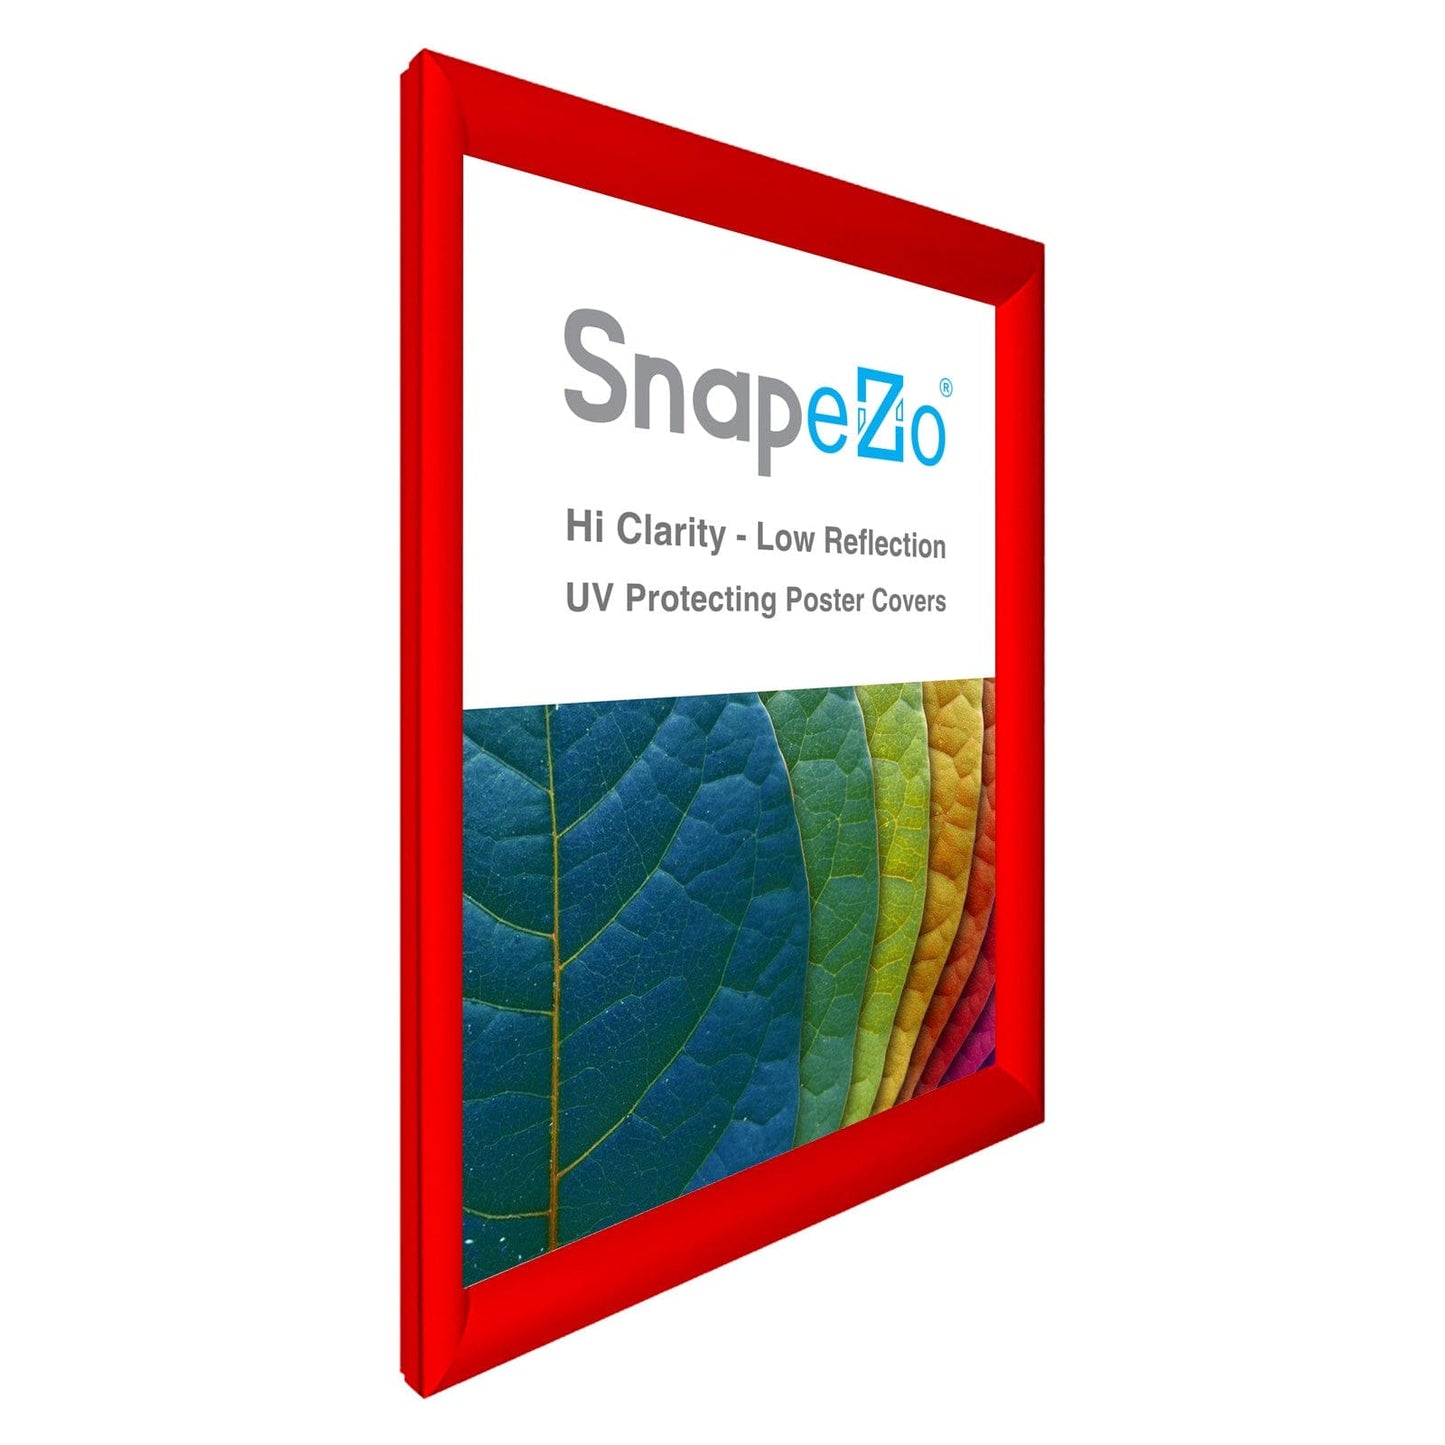 23x32 Red SnapeZo® Snap Frame - 1.2" Profile - Snap Frames Direct